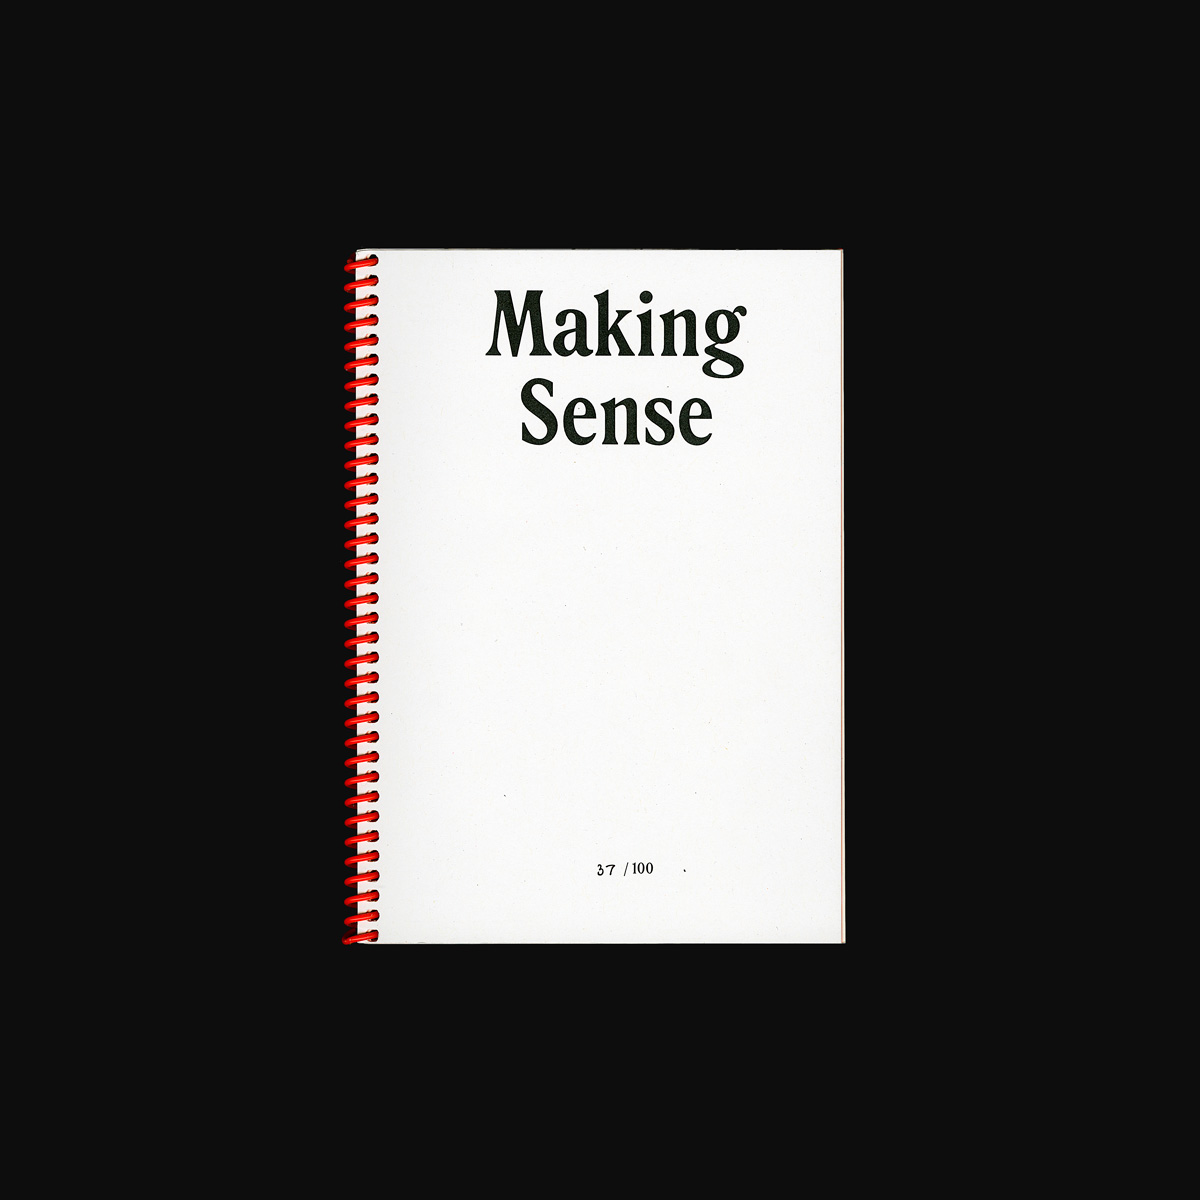 A scan of the front cover of the Making Sense catalogue. The publication is A5 sized, with a white cover and black text with the name of the exhibition in a dated, inky looking serif font. The catalogue is bound with bright orange spiral binding.